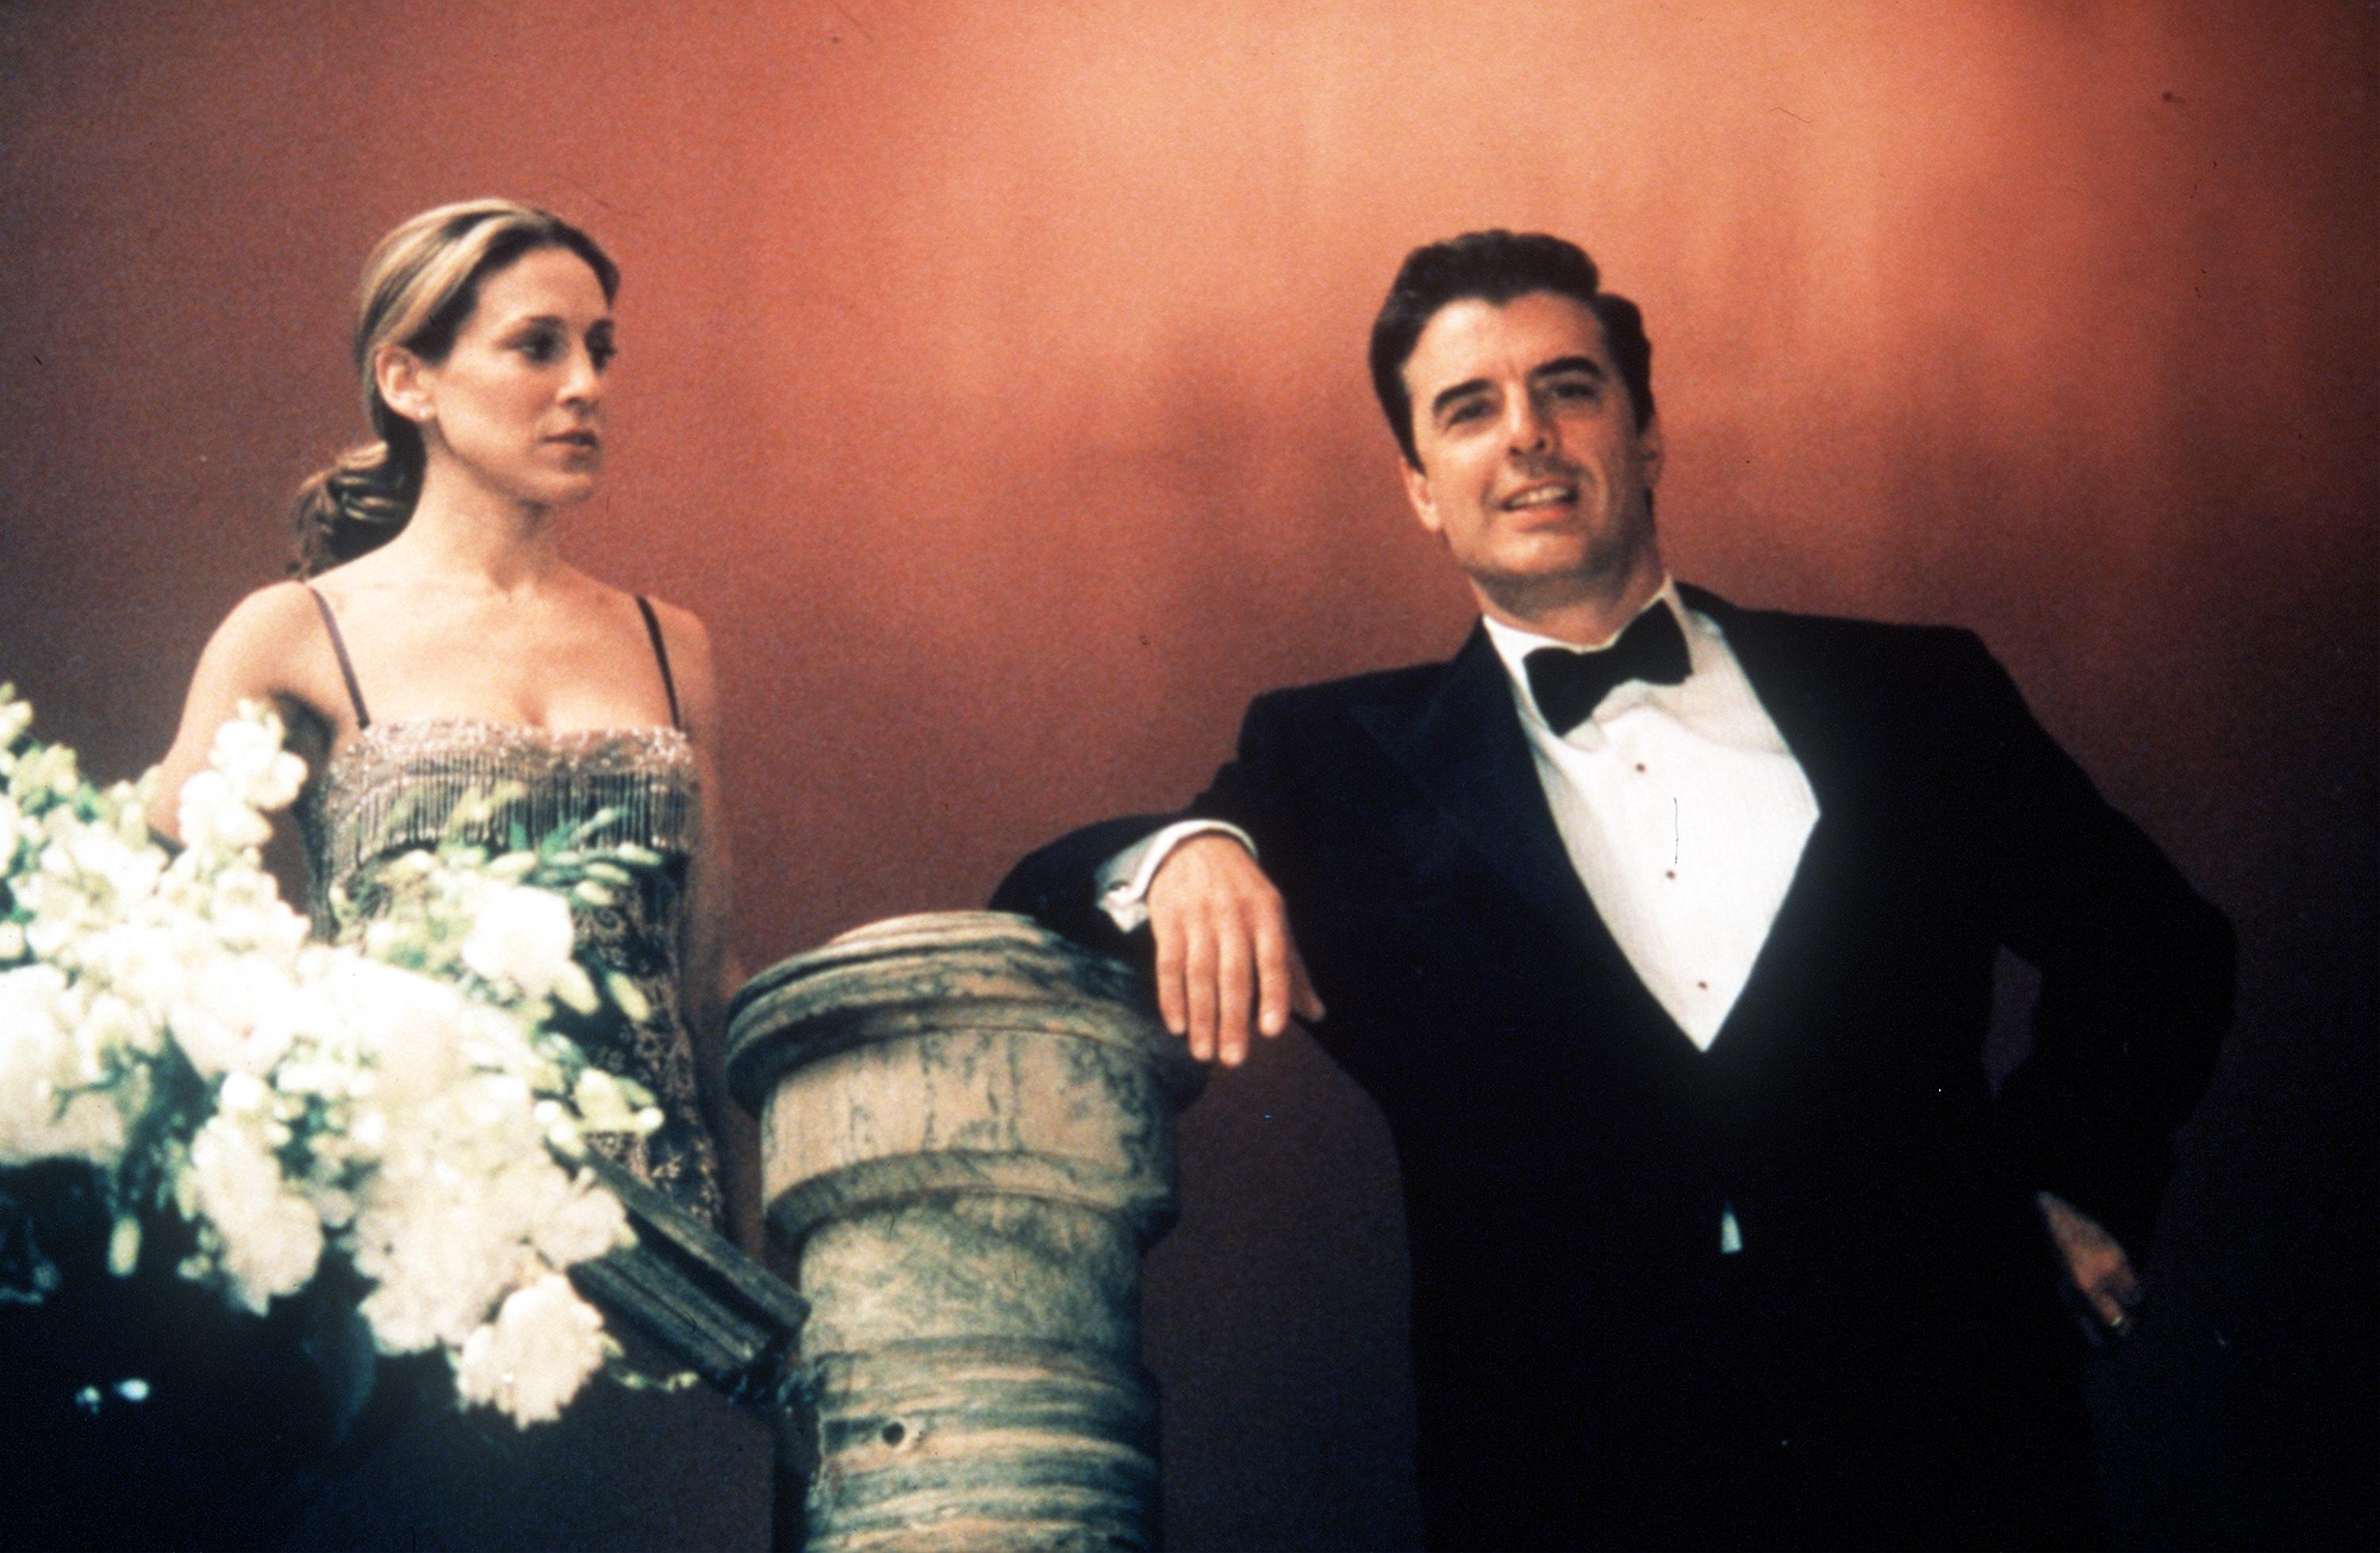 Sarah Jessica Parker as Carrie Bradshaw and Chris Noth has Mr. Big in 'Sex and the City'